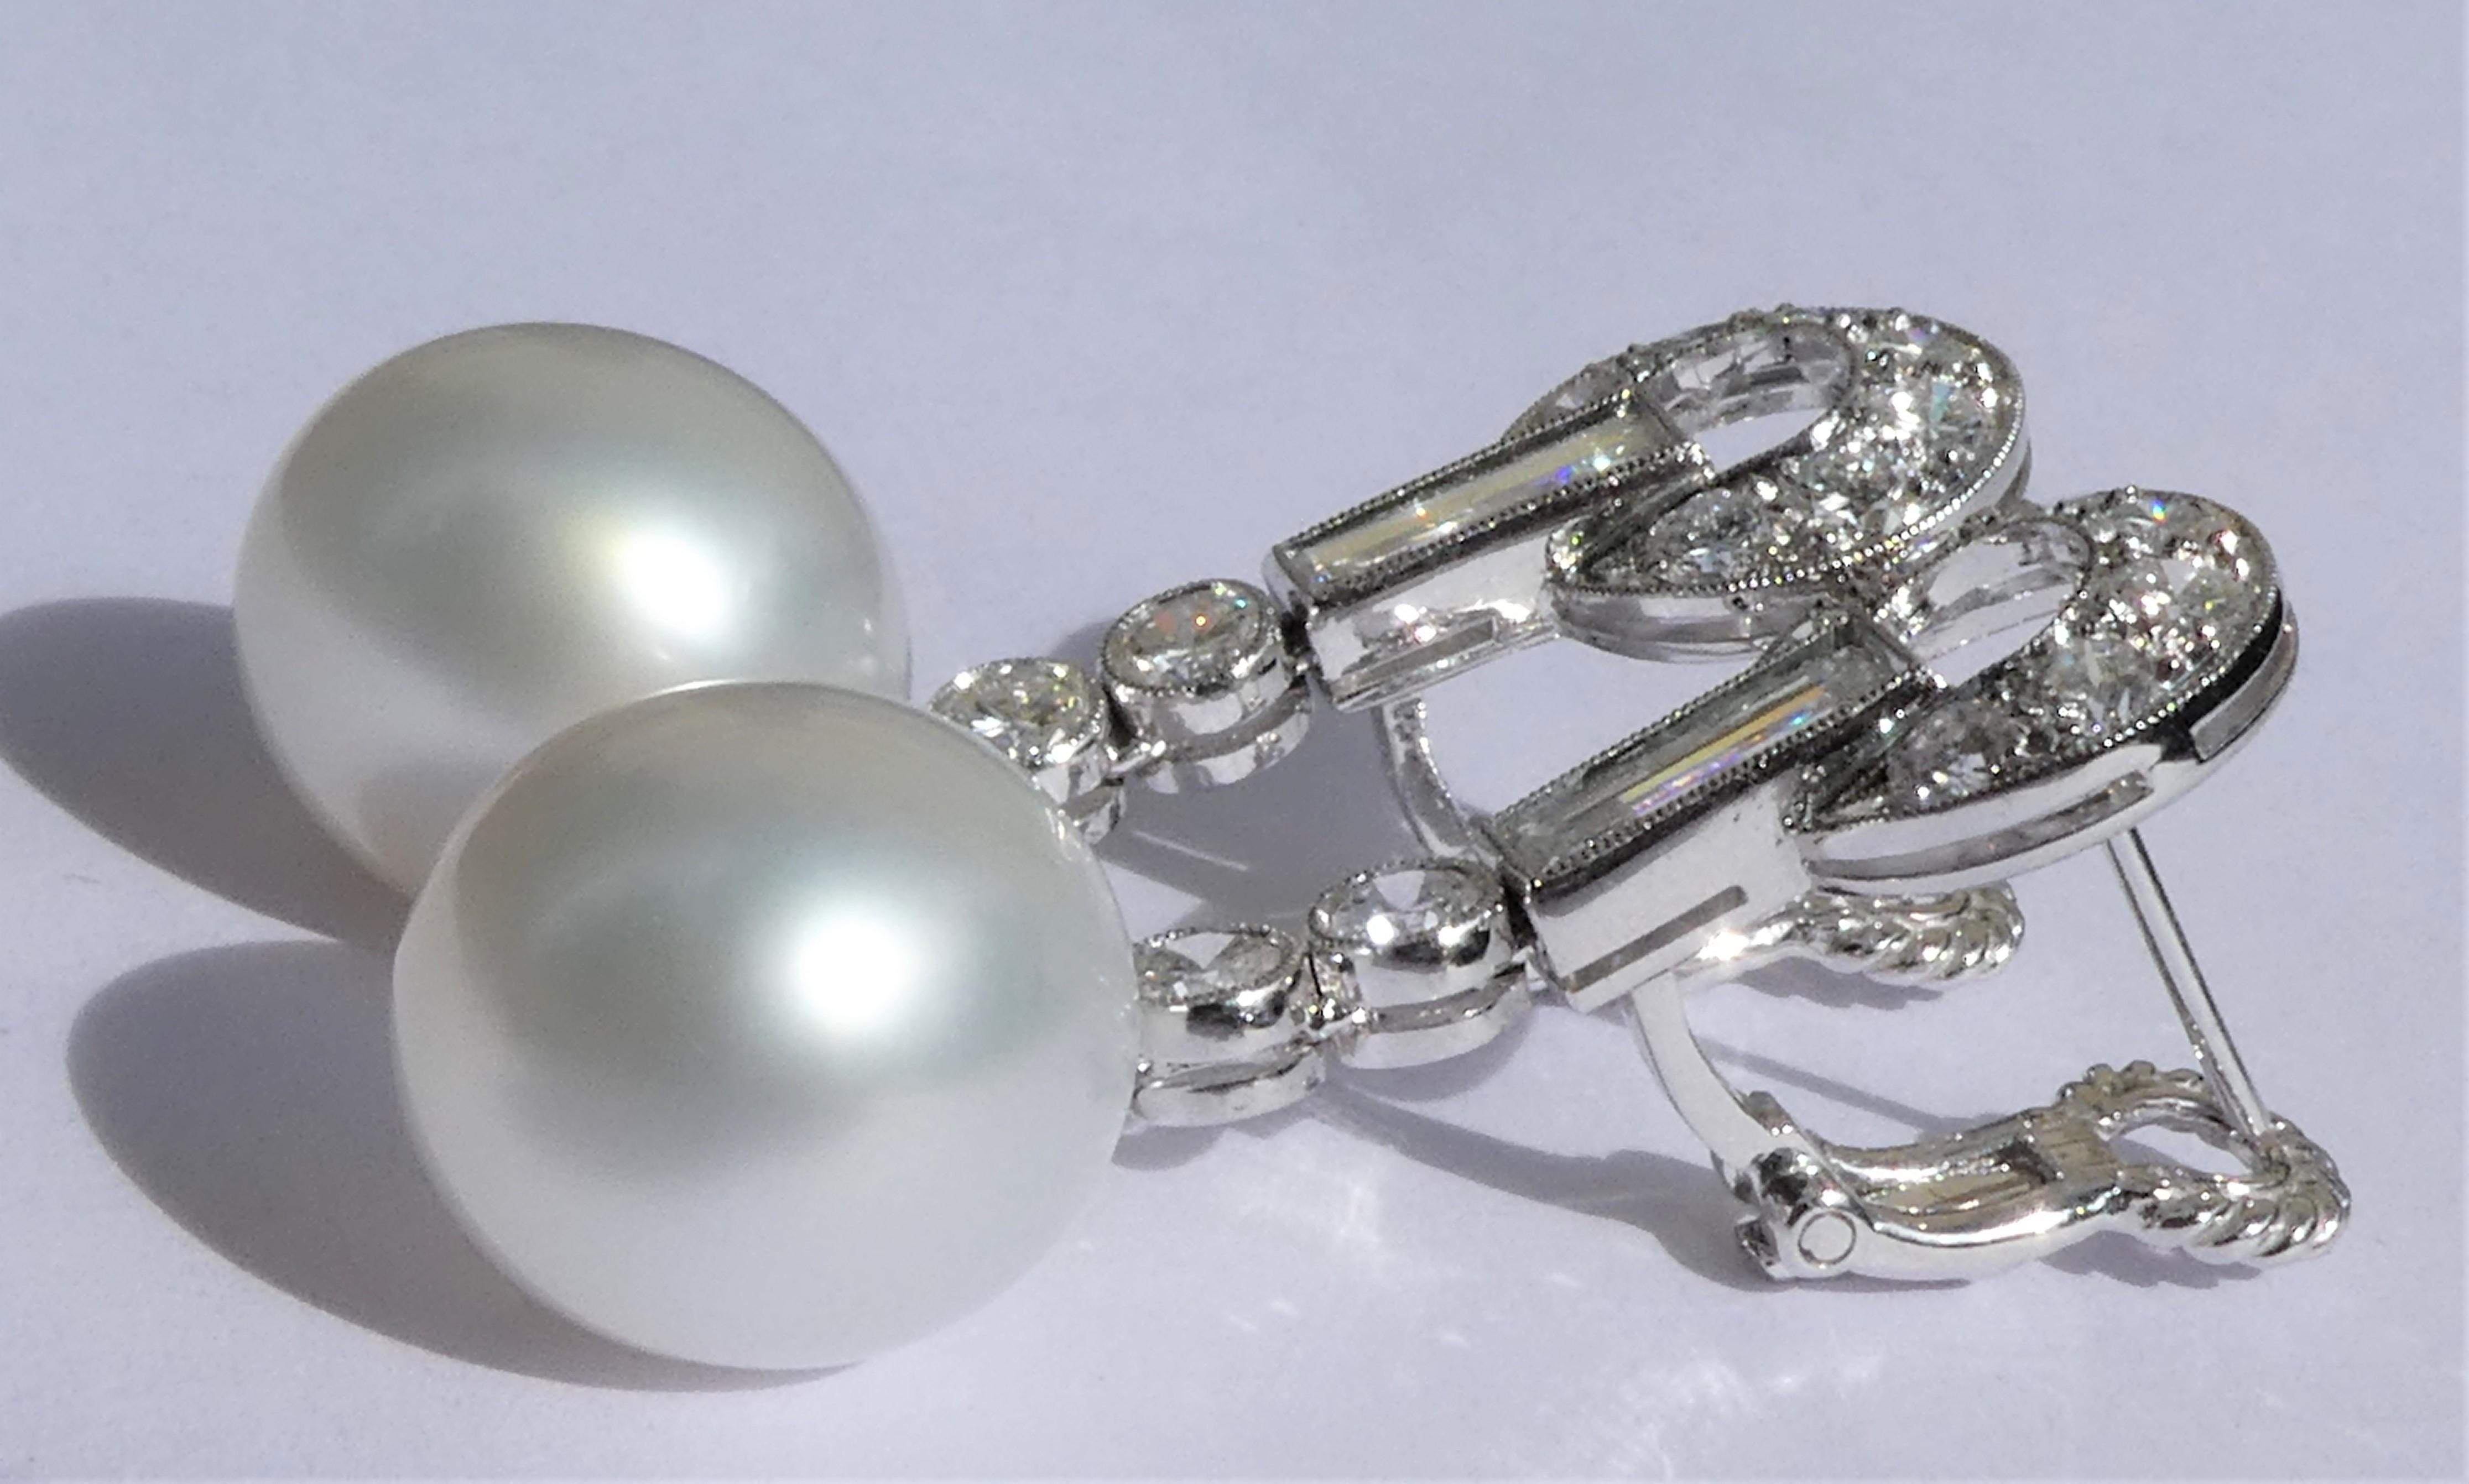 A pair of white immaculate lustrous slightly oval South Sea cultured pearls measuring 1.9 x 1.2 cm - 0.75 x 0.47 inch dangle elegantly from these movable drop earrings. They are handcrafted in 18 karat white gold and one-of-a-kind. The diamonds of